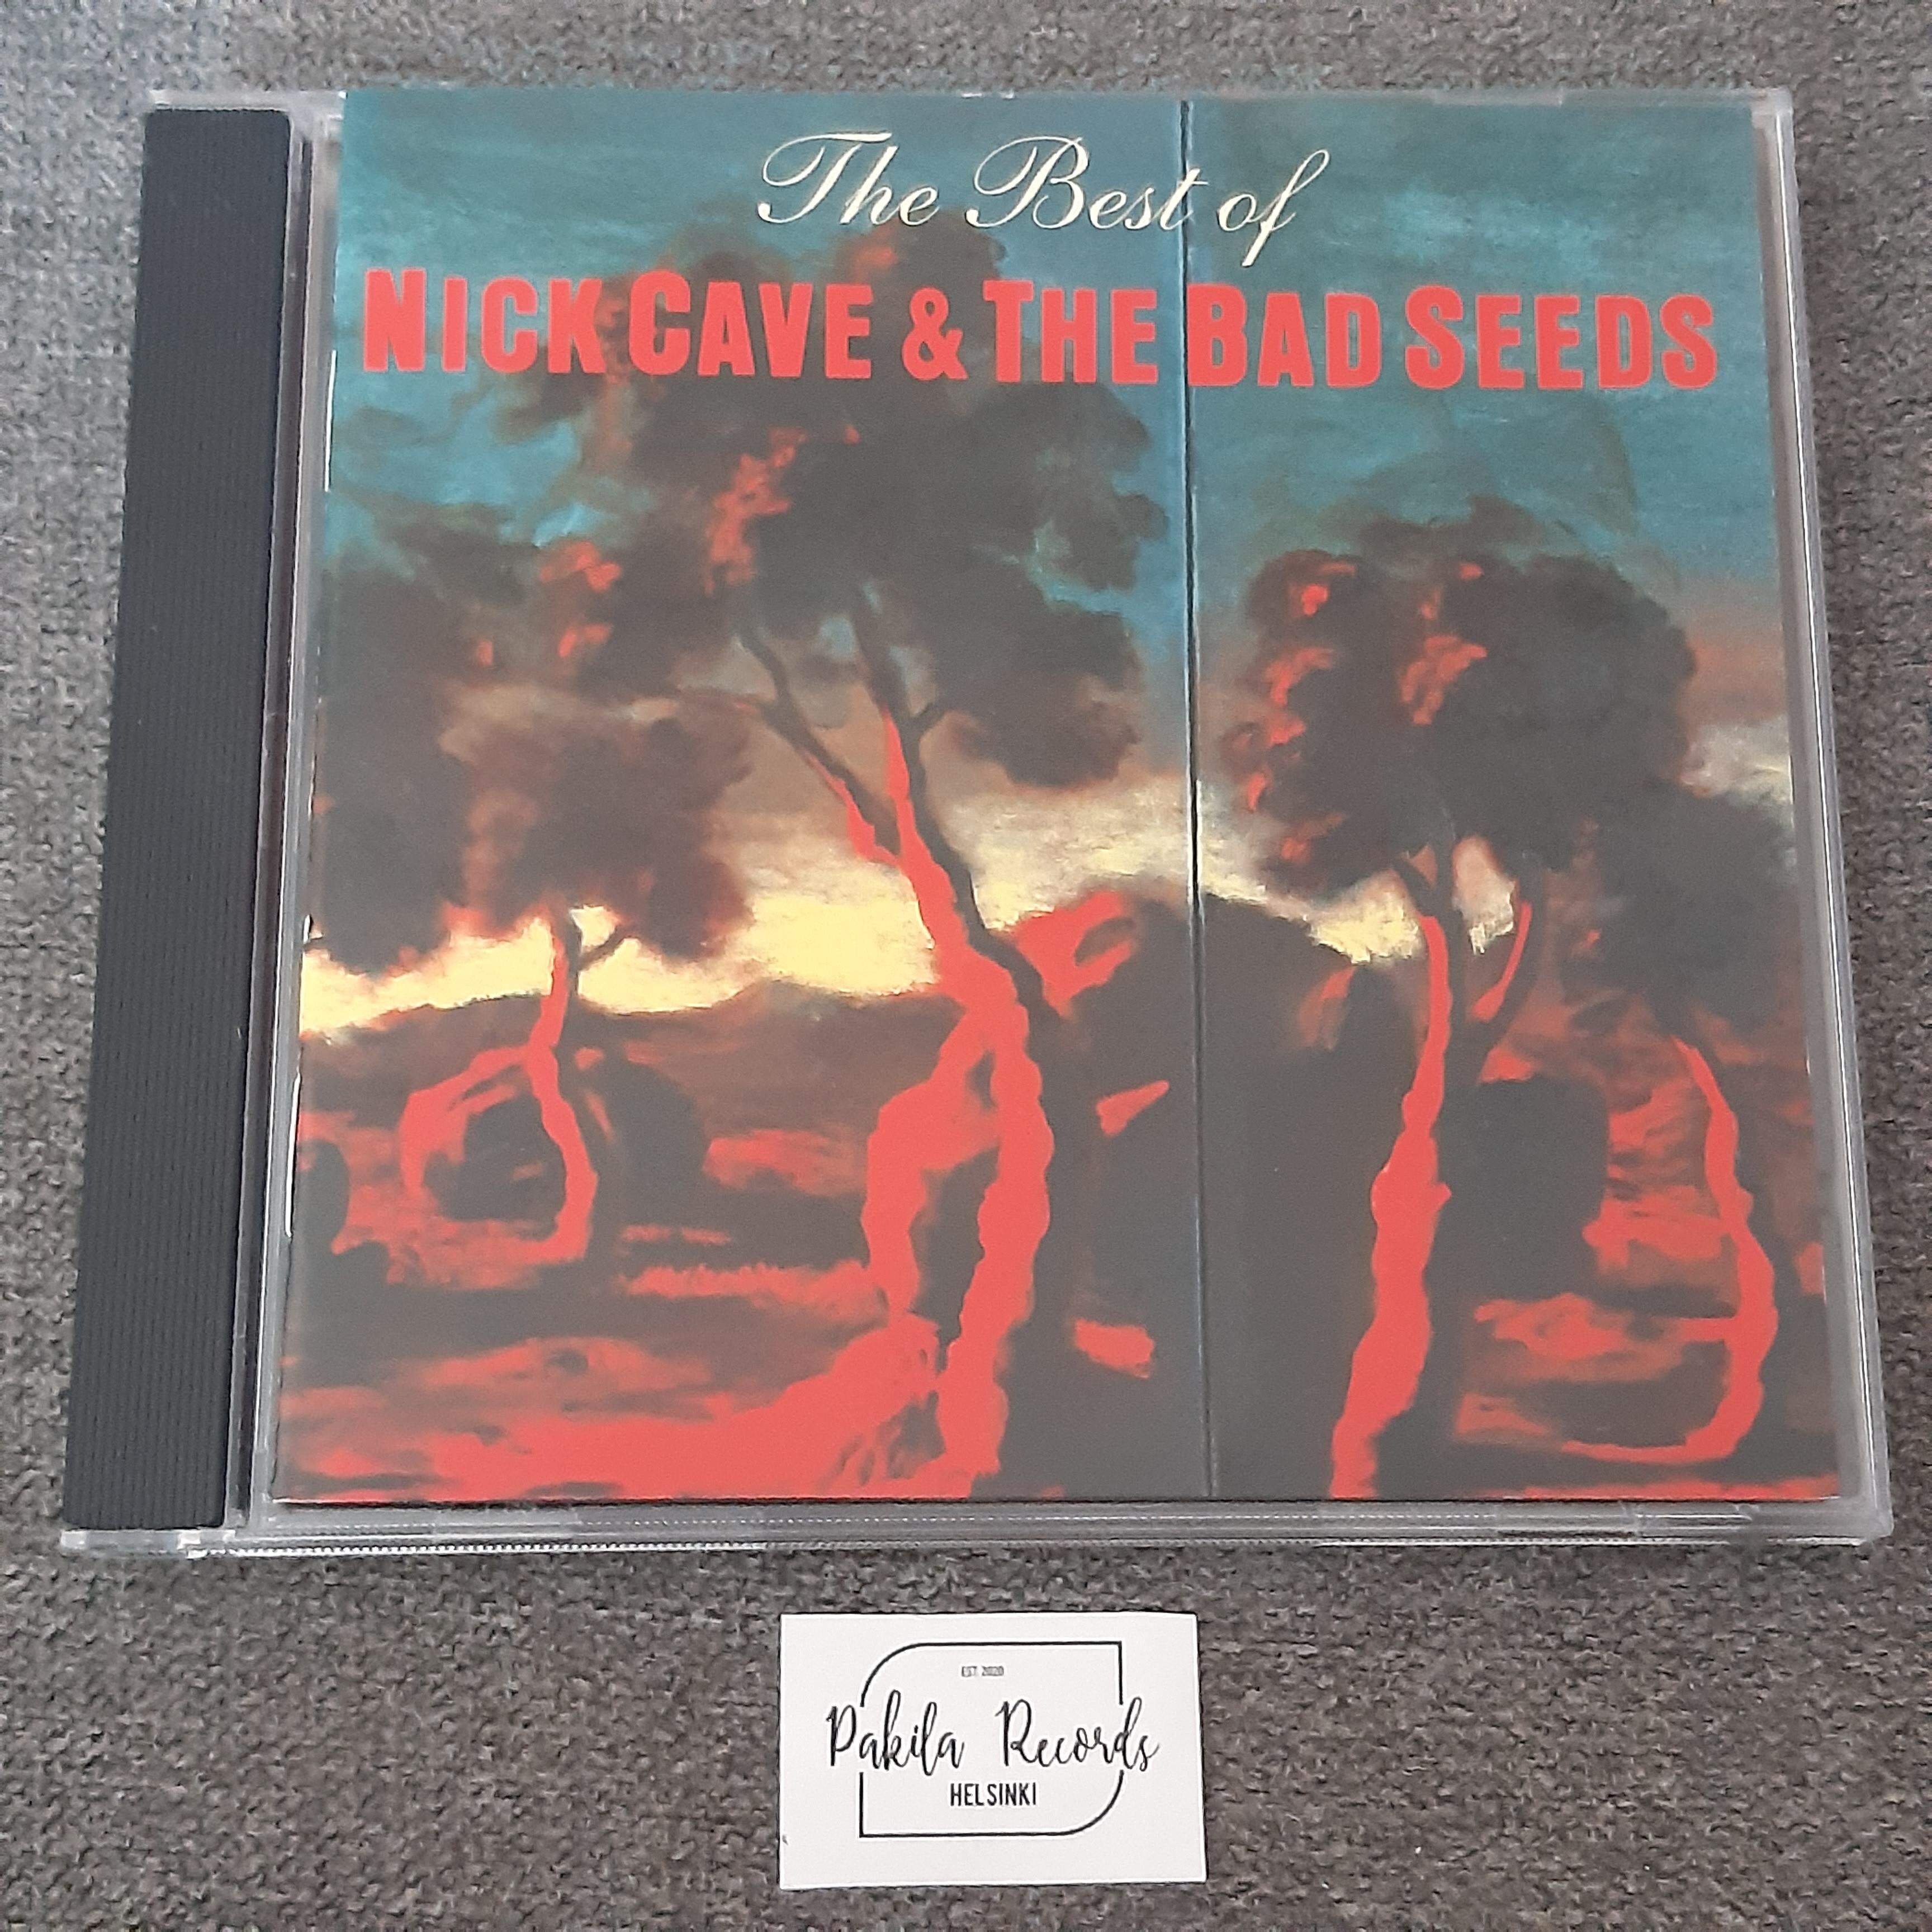 Nick Cave & The Bad Seeds - The Best Of - CD (käytetty)